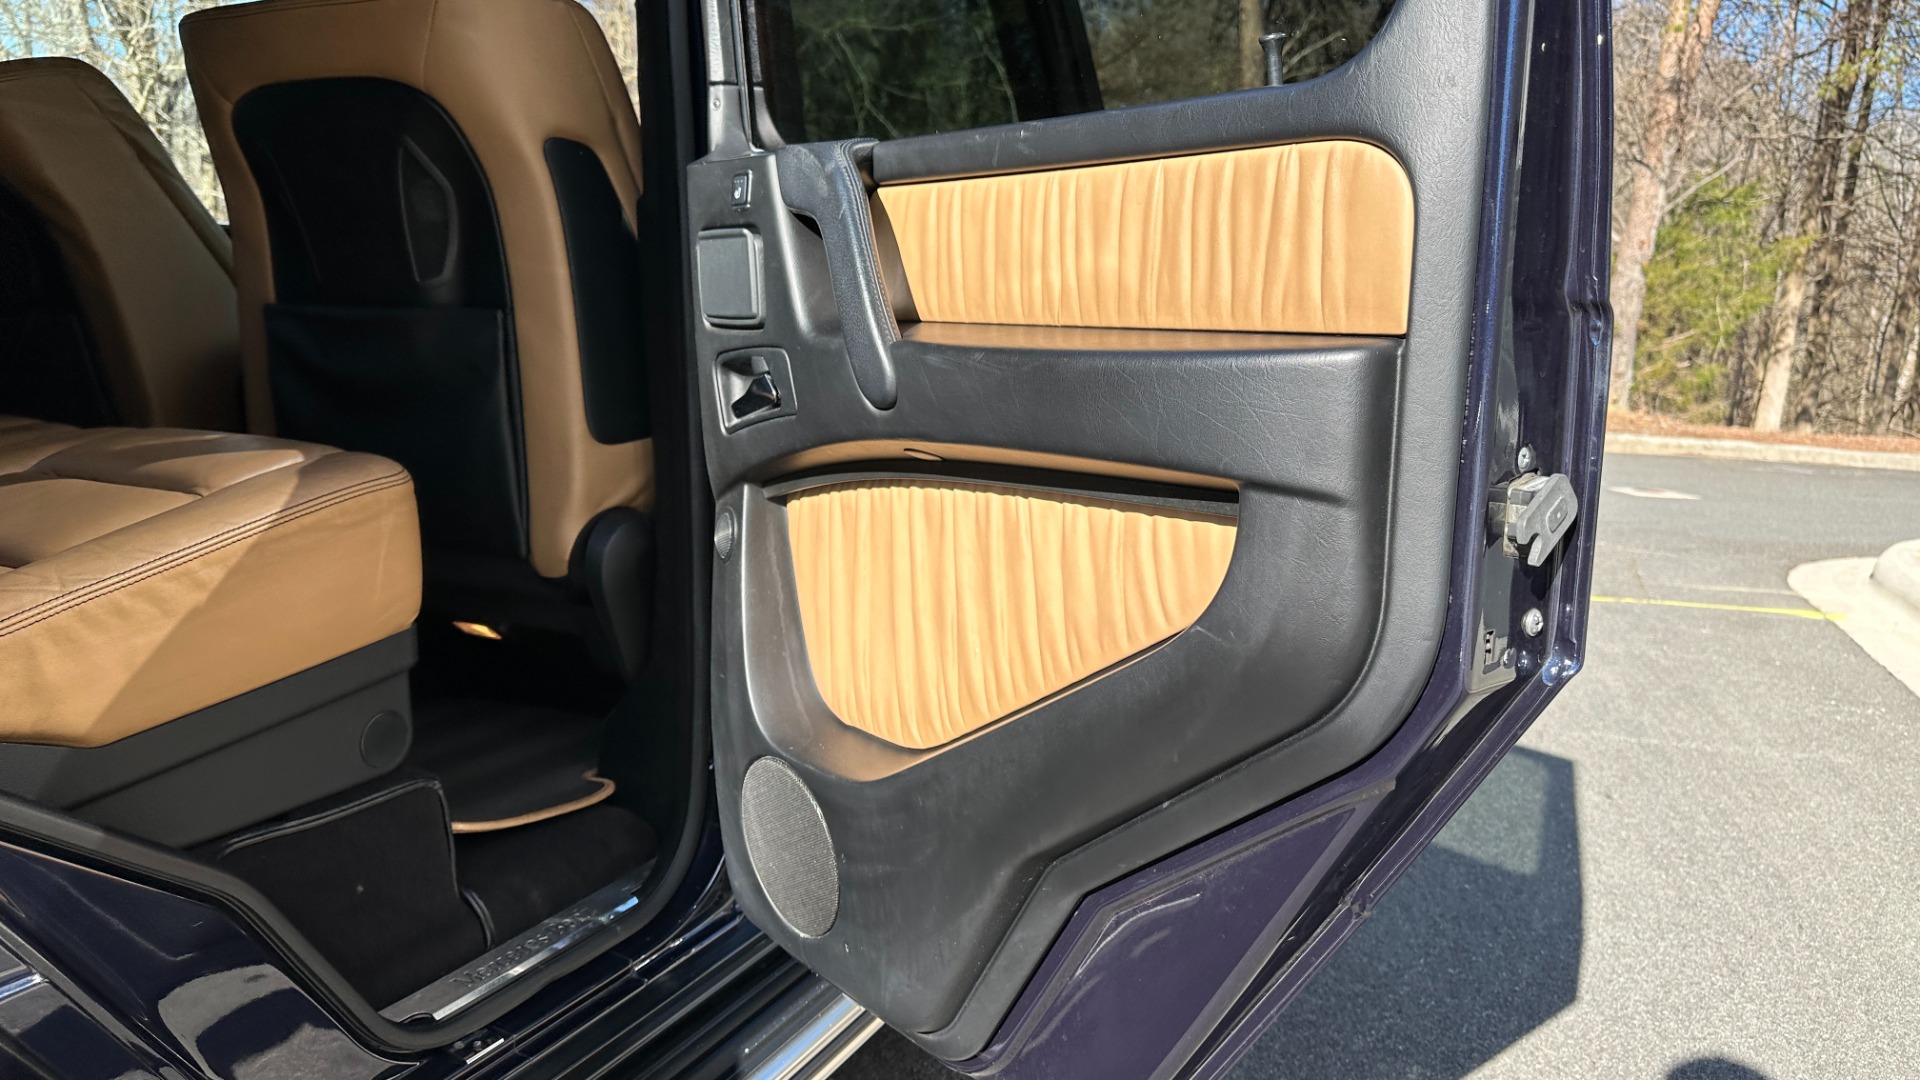 Used 2015 Mercedes-Benz G-Class G550 / DESIGNO NAPPA LEATHER / DESIGNO HEADLINER / HEATED STEERING / NAV /  for sale Sold at Formula Imports in Charlotte NC 28227 26